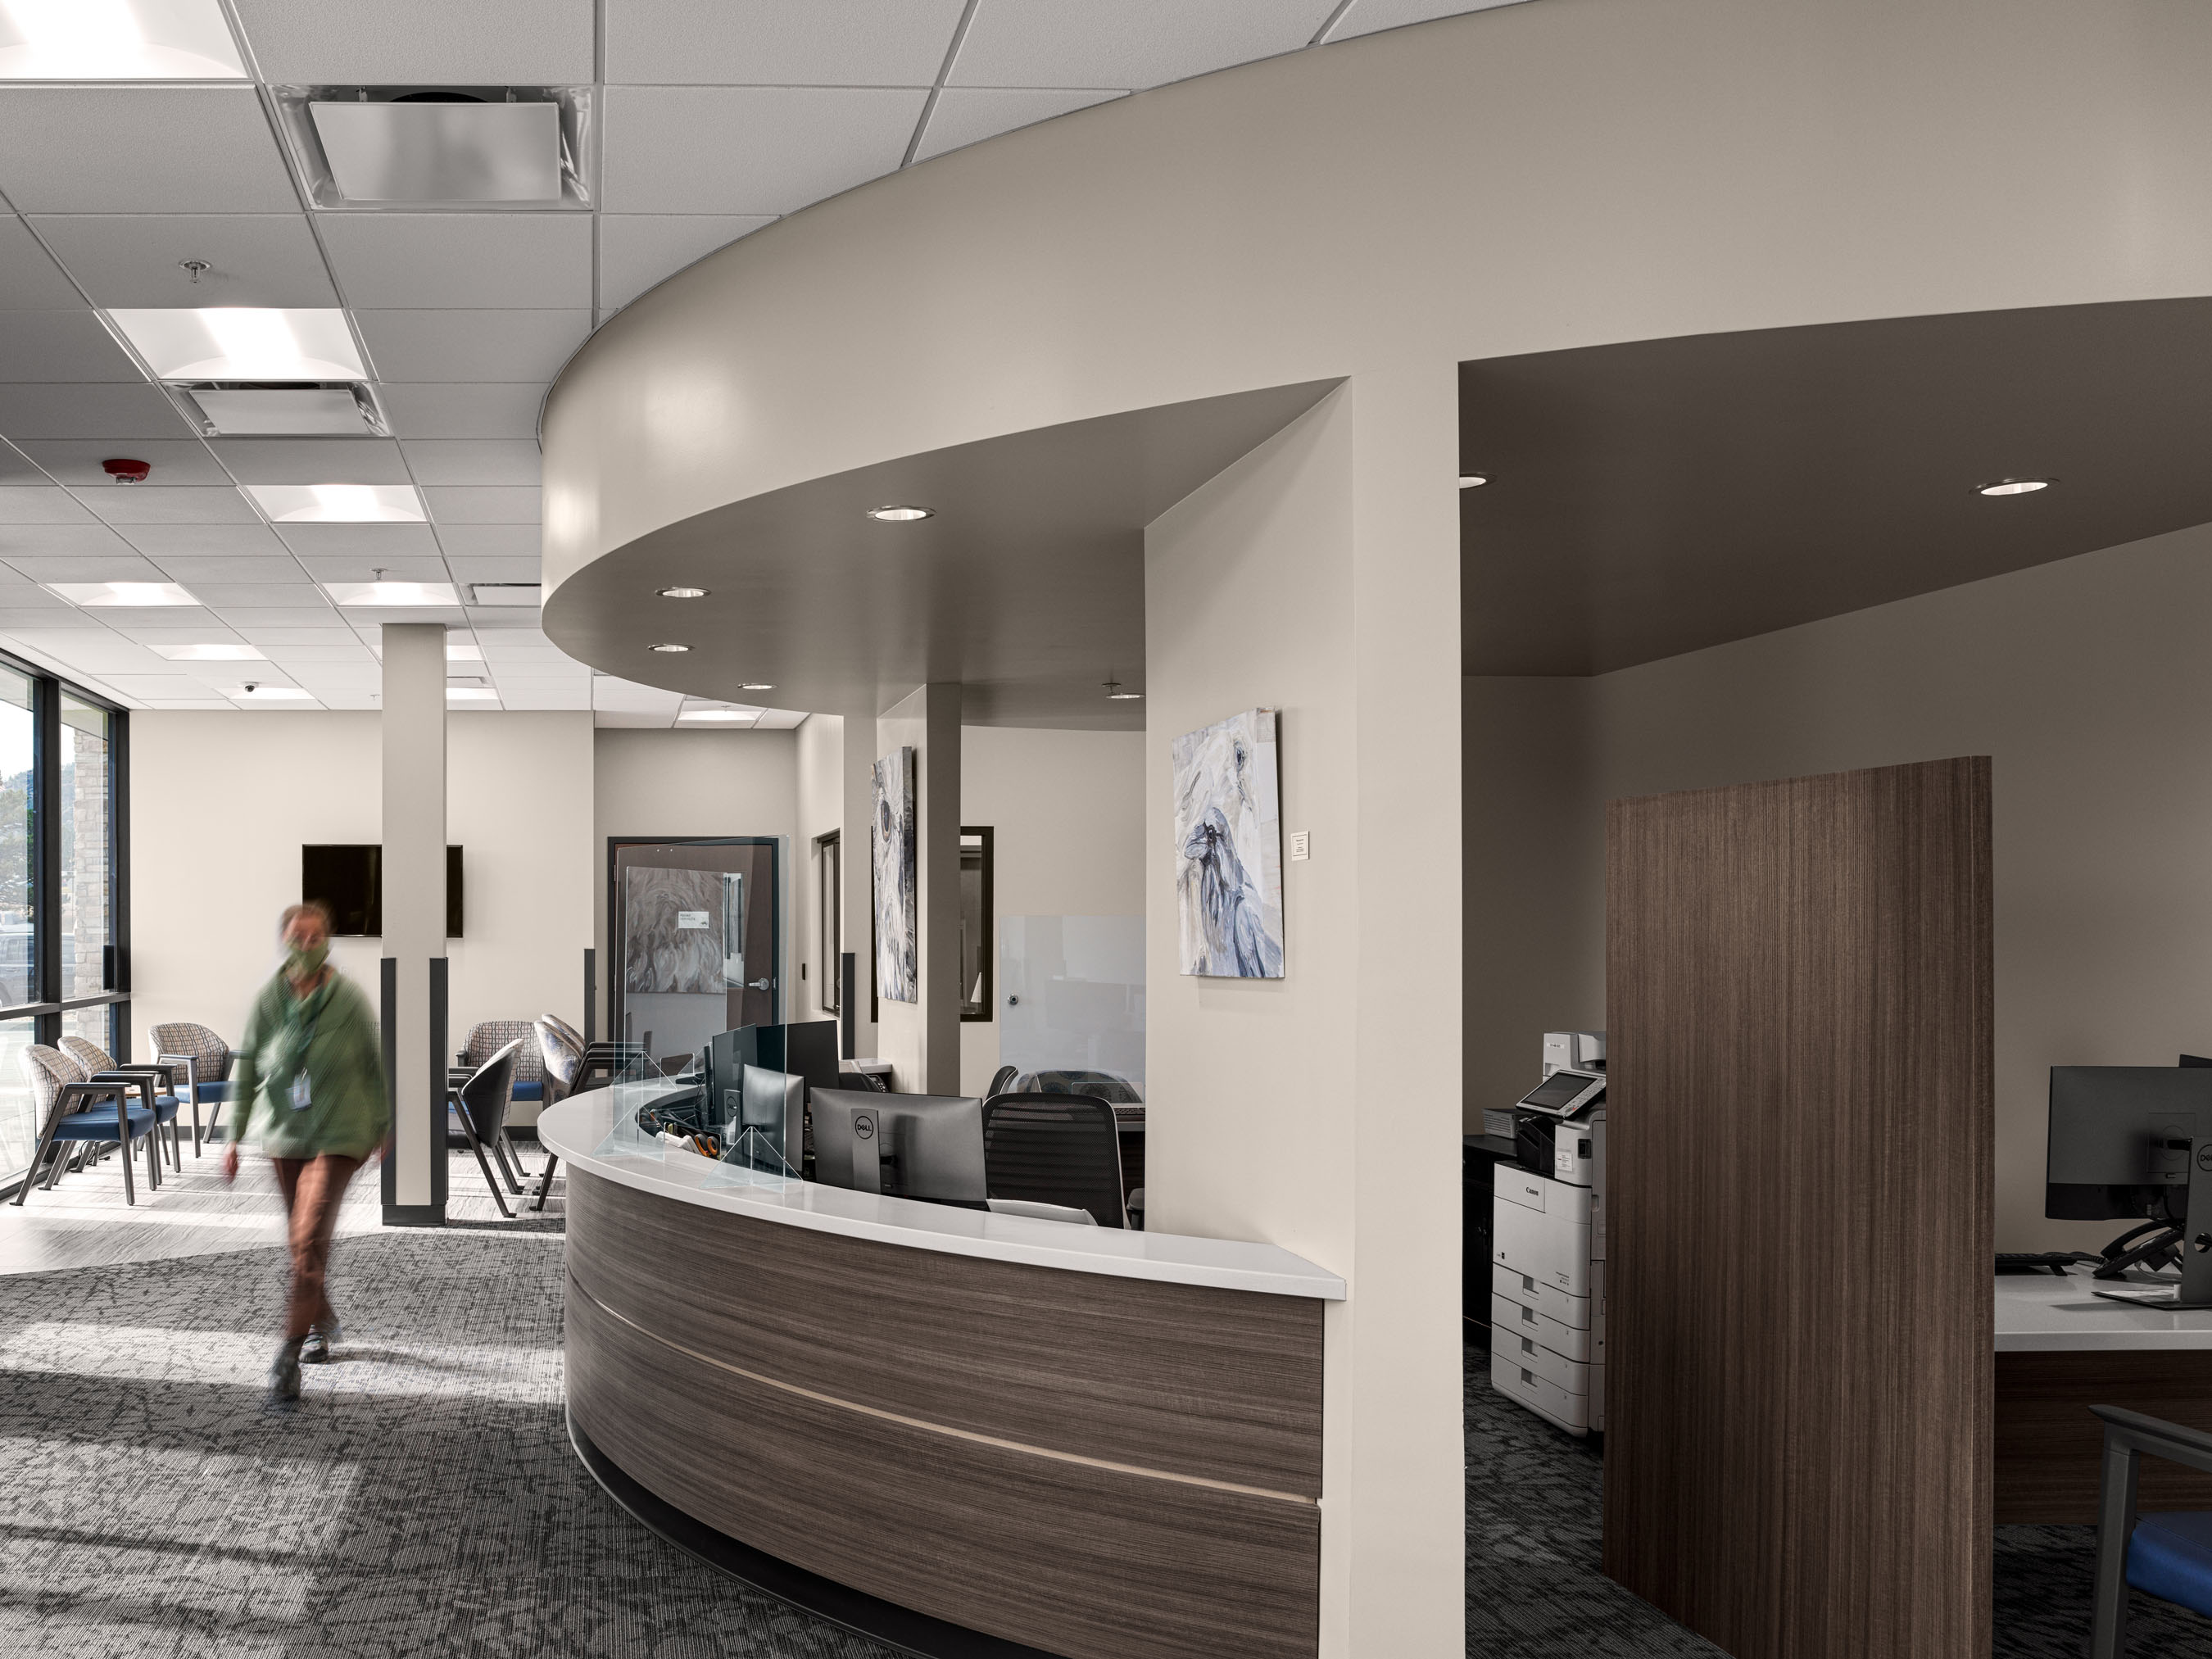 Commercial interior photography by Warren Diggles. Receptionist walking through lobby at Estes Park Health Urgent Care. Project by Bas1s Architecture and Saunders Heath Construction.